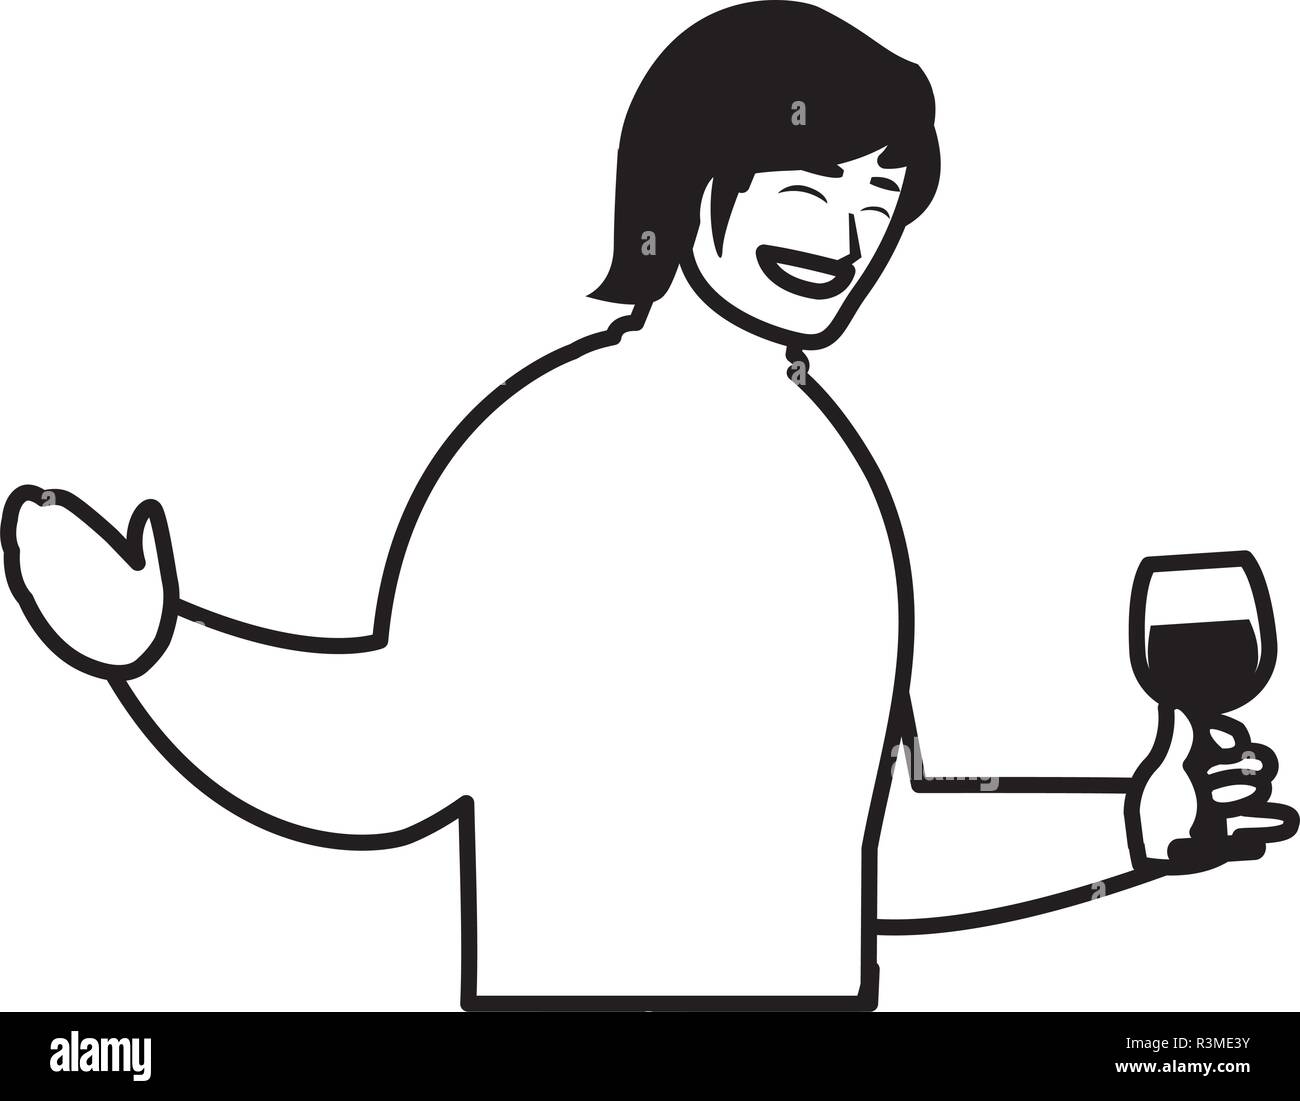 Happy man enjoying a alcohol drink over white background, vector illustration Stock Vector